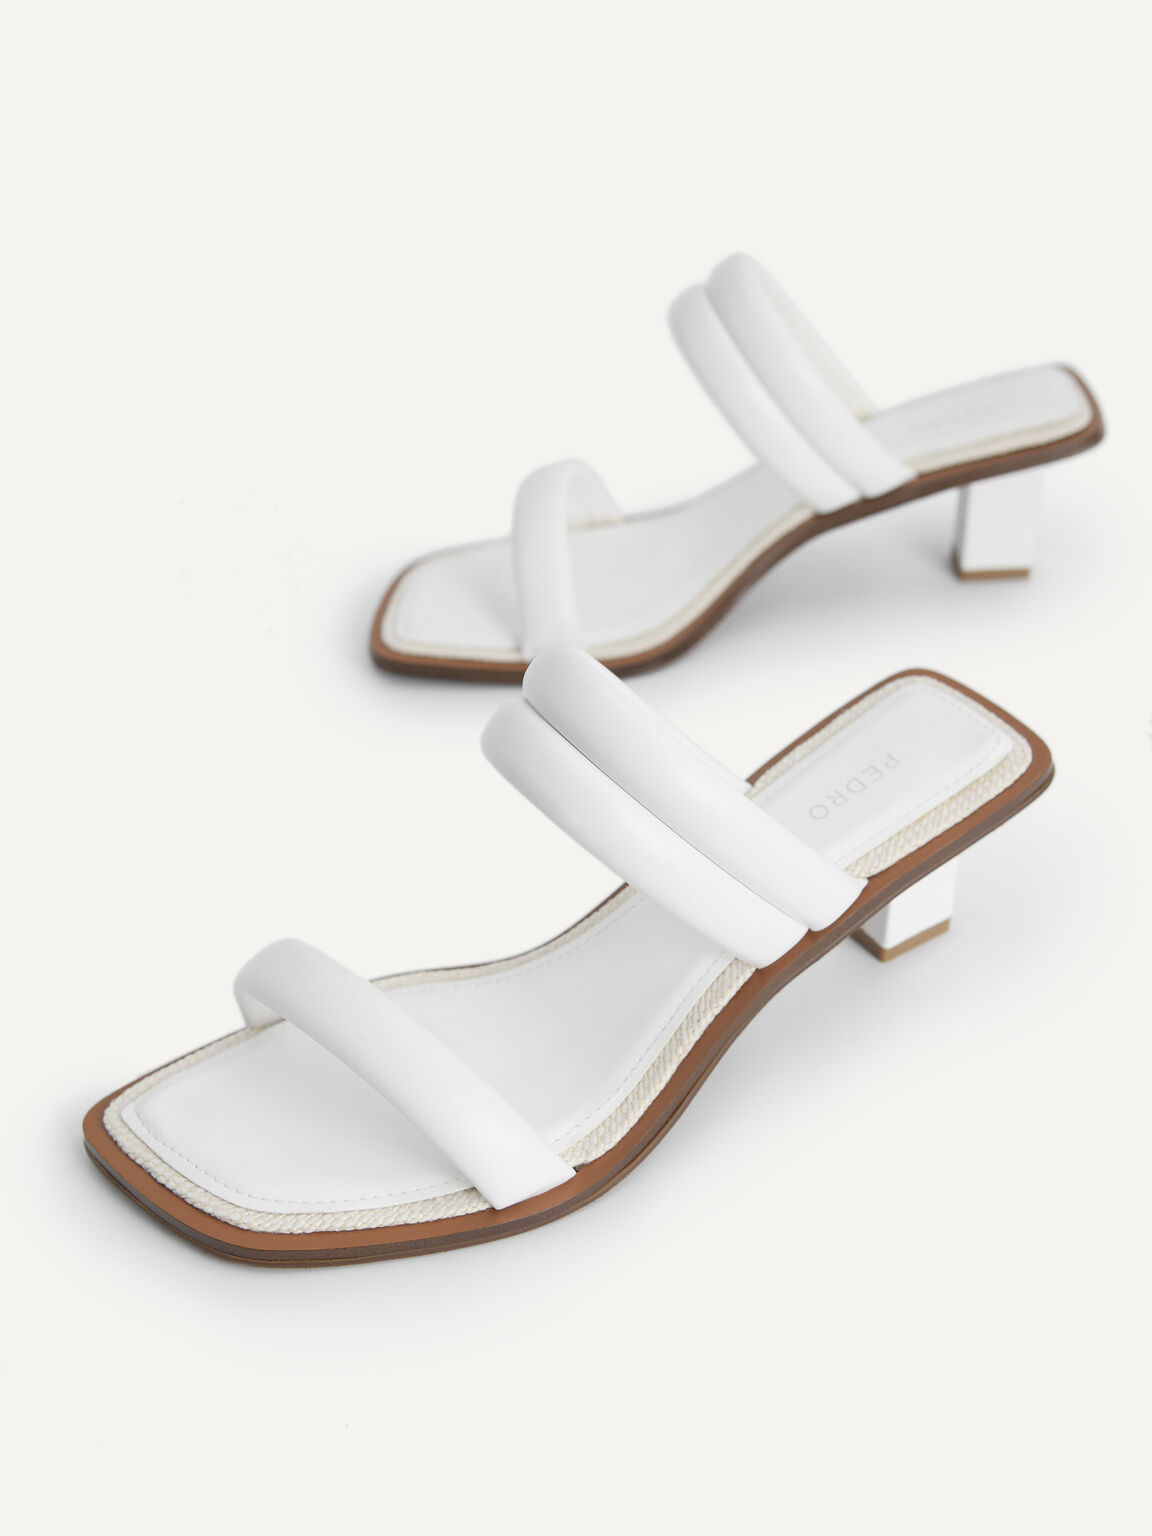 Double Strap Heeled Sandals, White